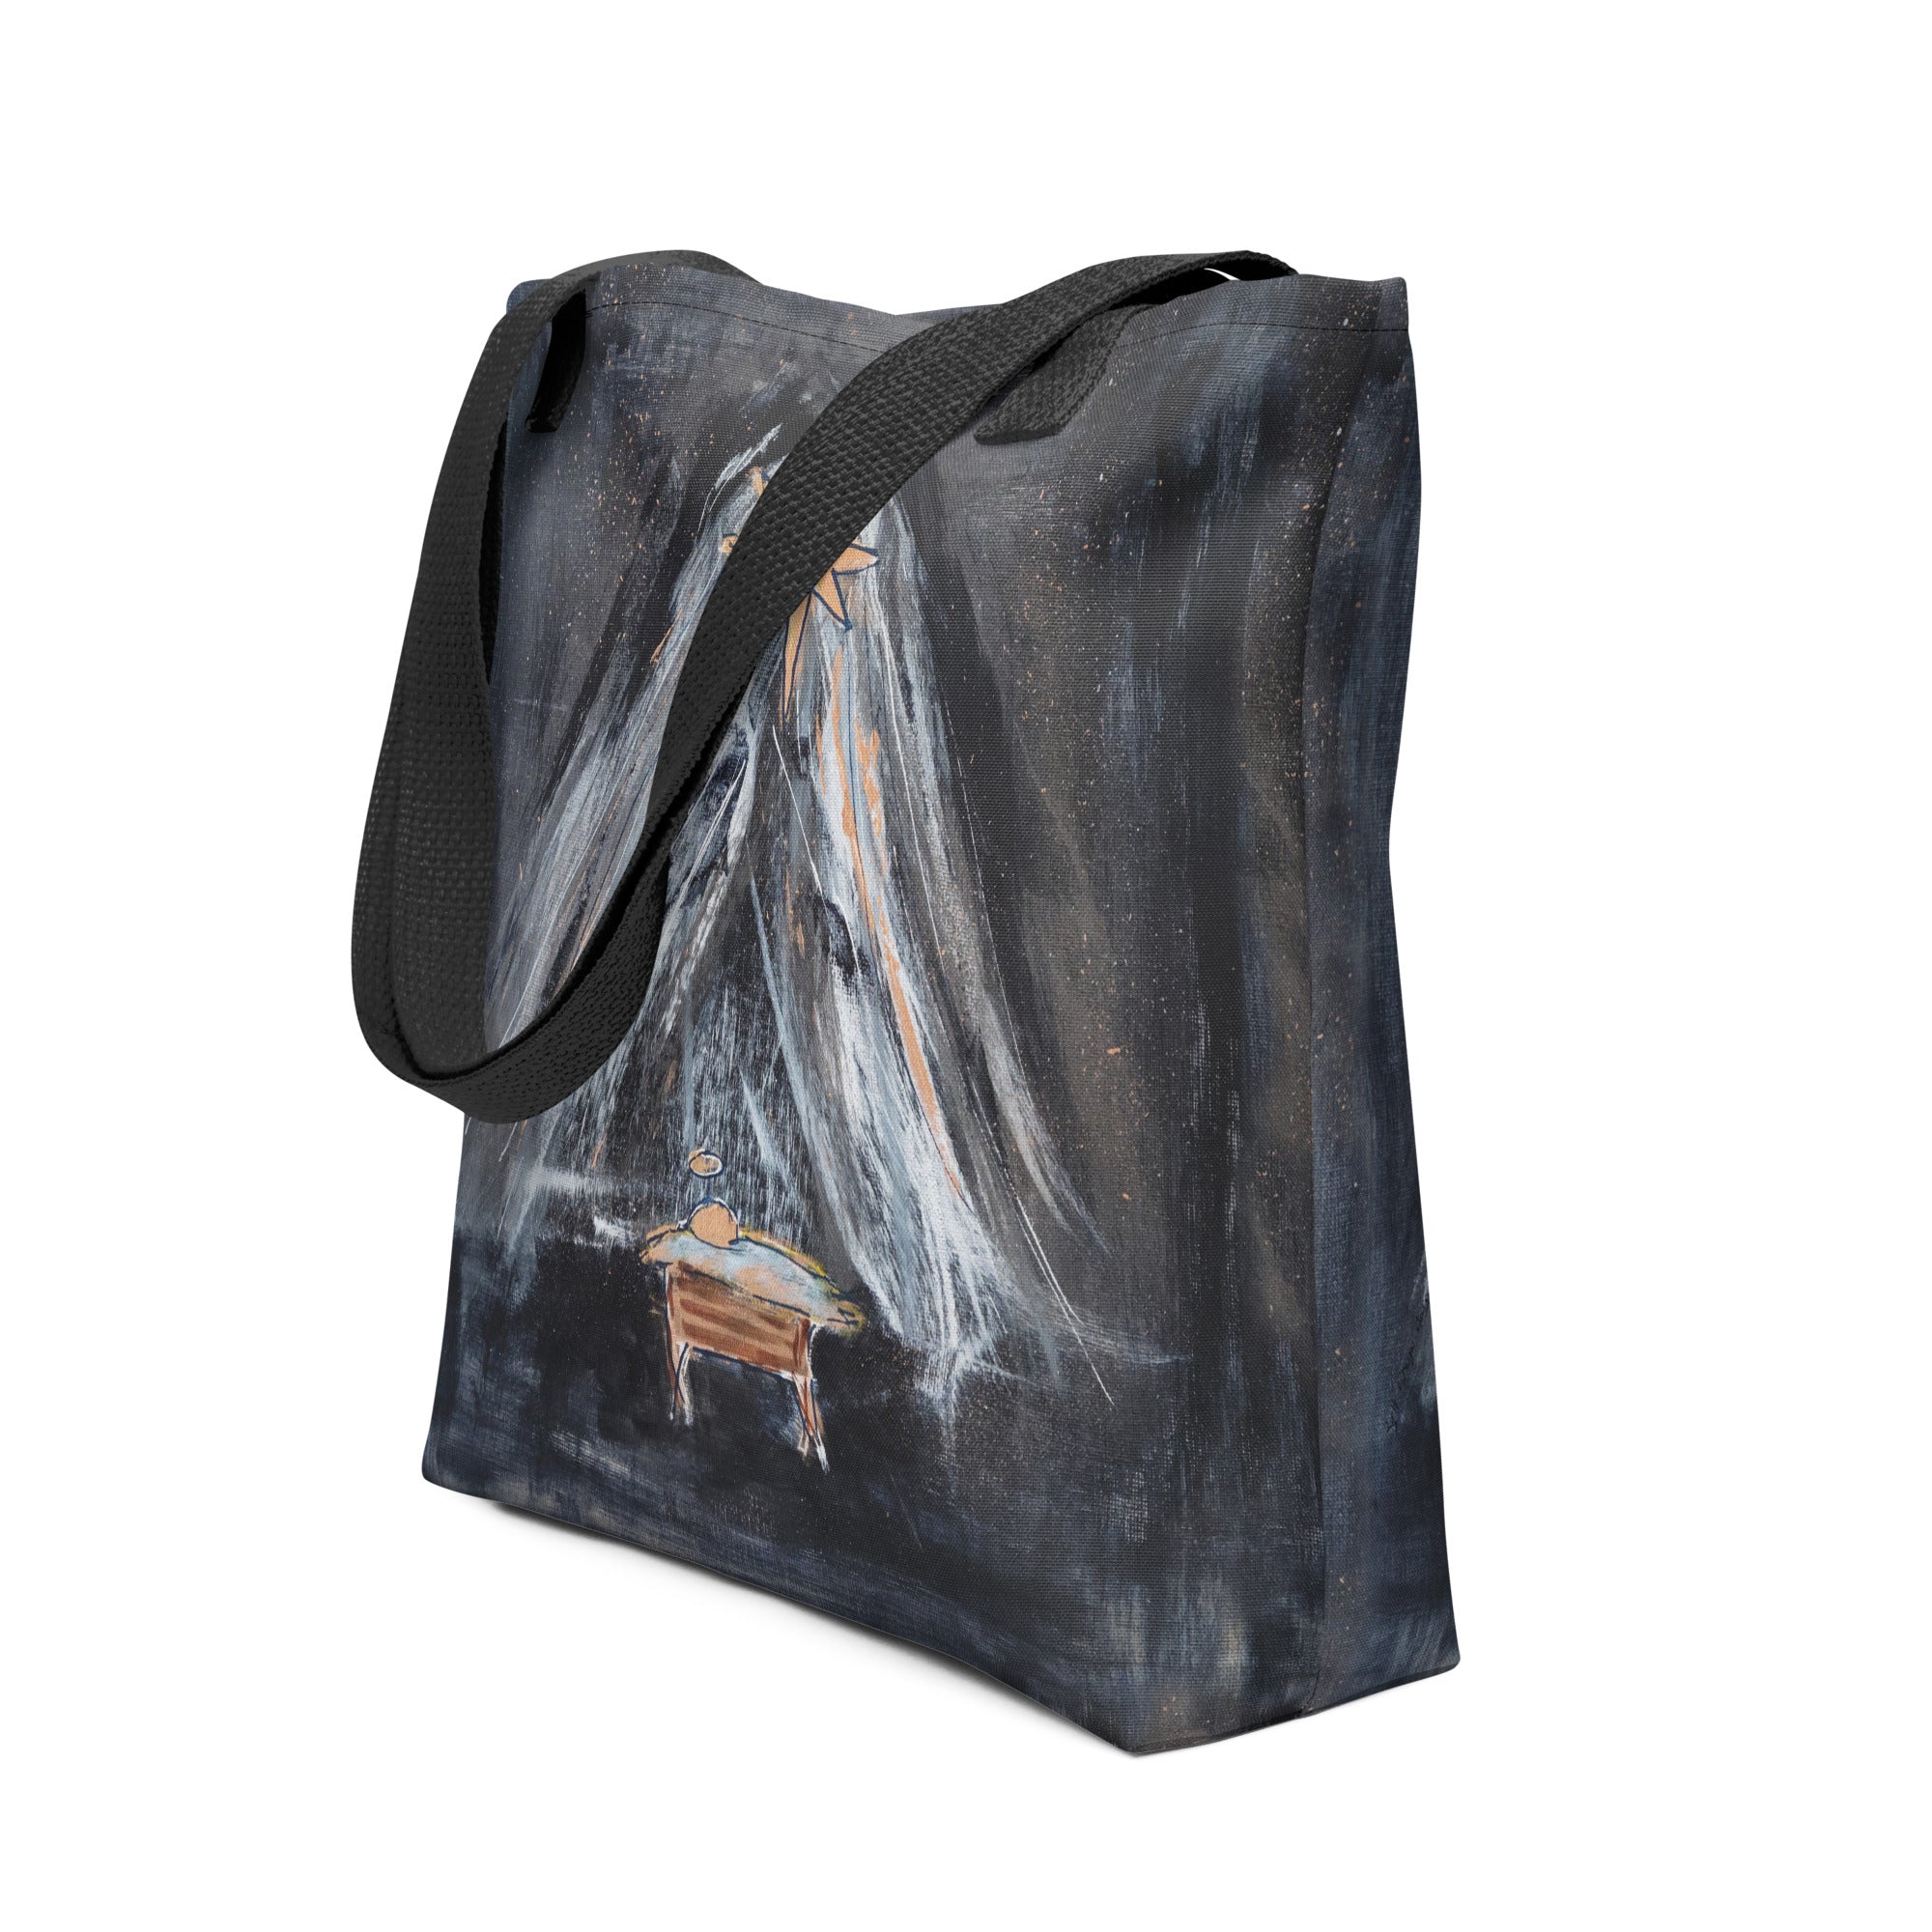 NEW! - And the Star Shone Down - Artful Tote Bag